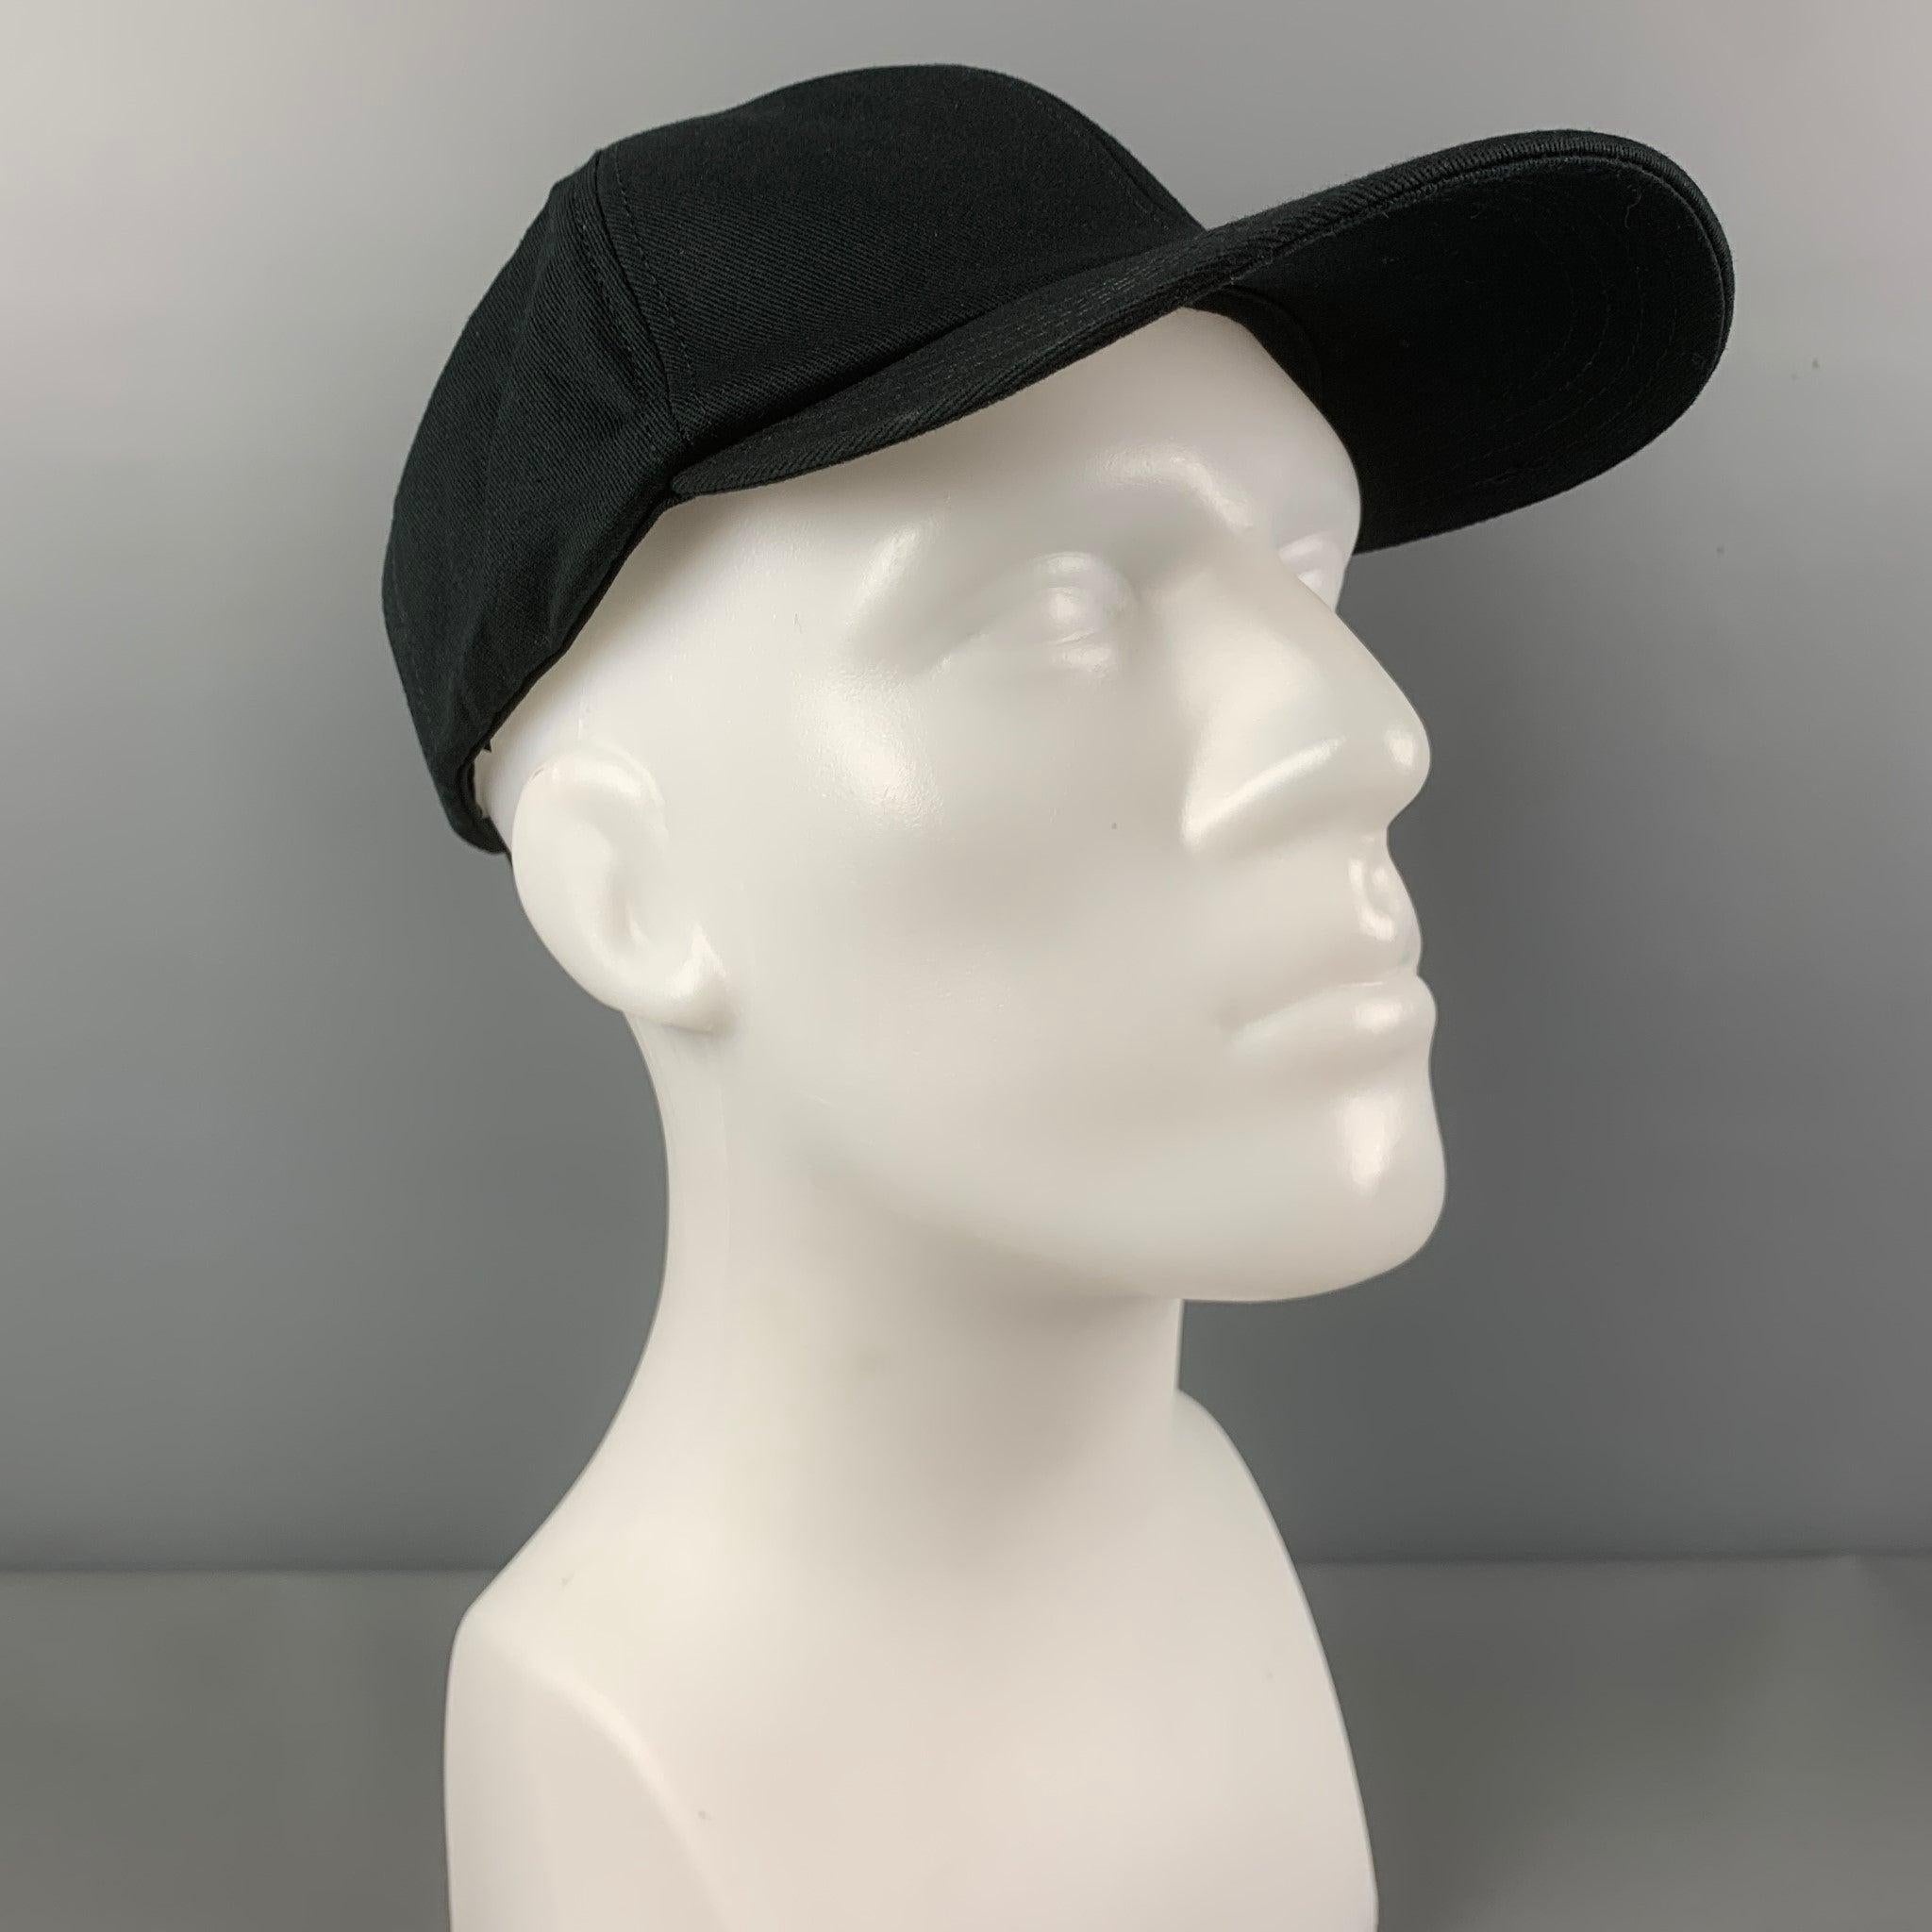 OFF-WHITE hat comes in a black cotton featuring a 